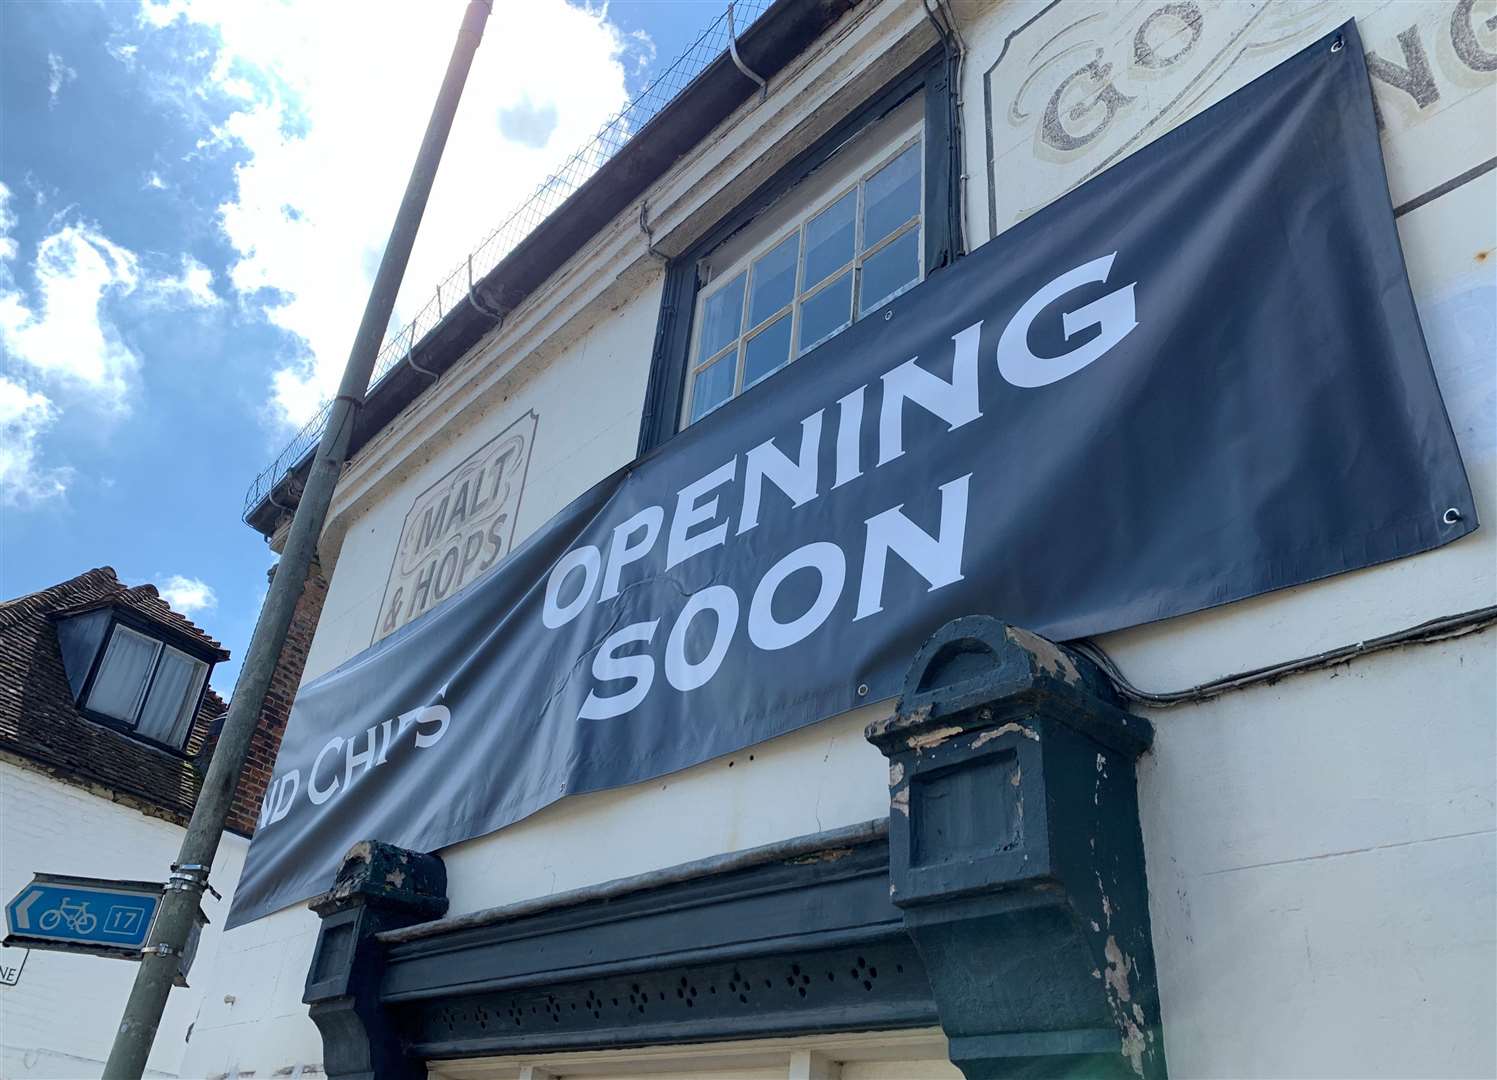 The old pub in High Street, Bridge, will start serving kebabs and fish and chips when it reopens